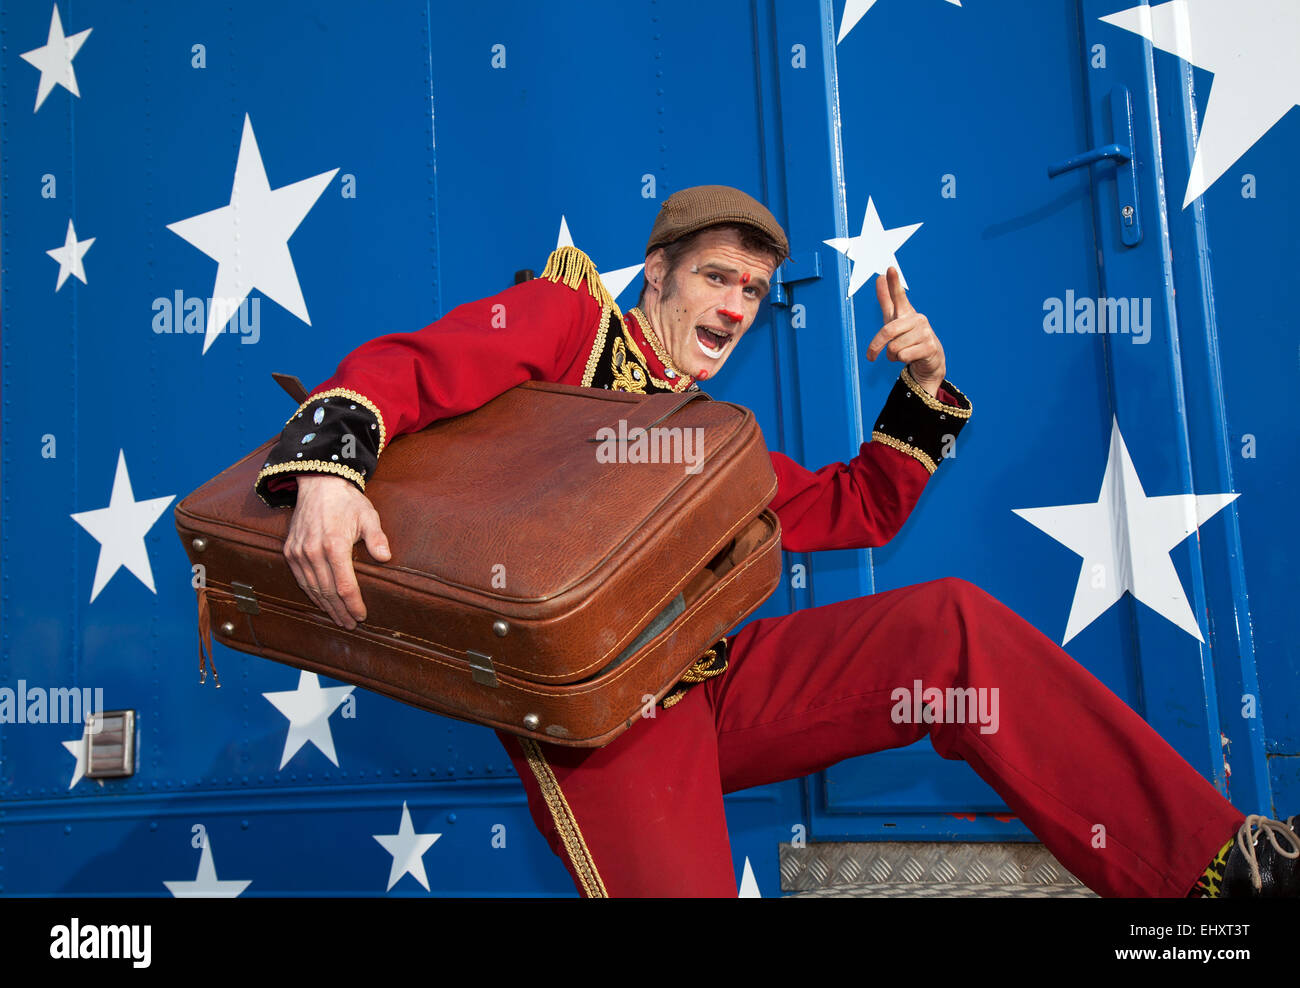 Circus Clown at Southport, Merseyside, UK 18th March, 2015. Professional clown 'Crazy Blakey' aka Blake Richardson prepares for his 1st performance.   The all-human circus spectacular, owned by Show Directors John Courtney and Stephen Courtney trading as Circus Vegas/American Circus has arrived in SOUTHPORT, the travelling show produced by the famous Uncle Sam's Great American Circus, tours for ten months a year. Stock Photo